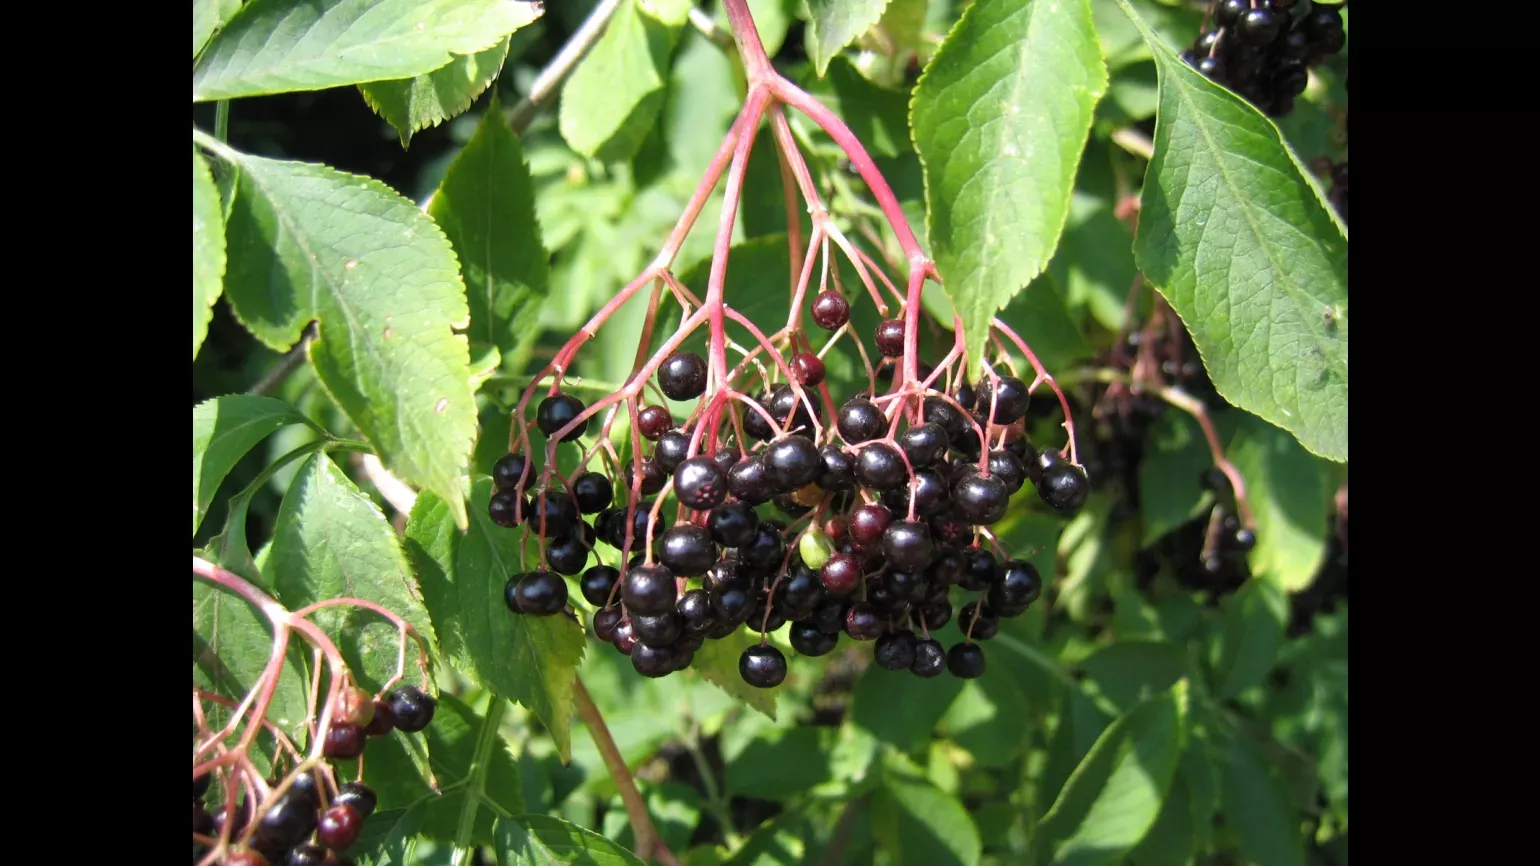 A large amount of ripe elder berries hang in a bunch from a tree